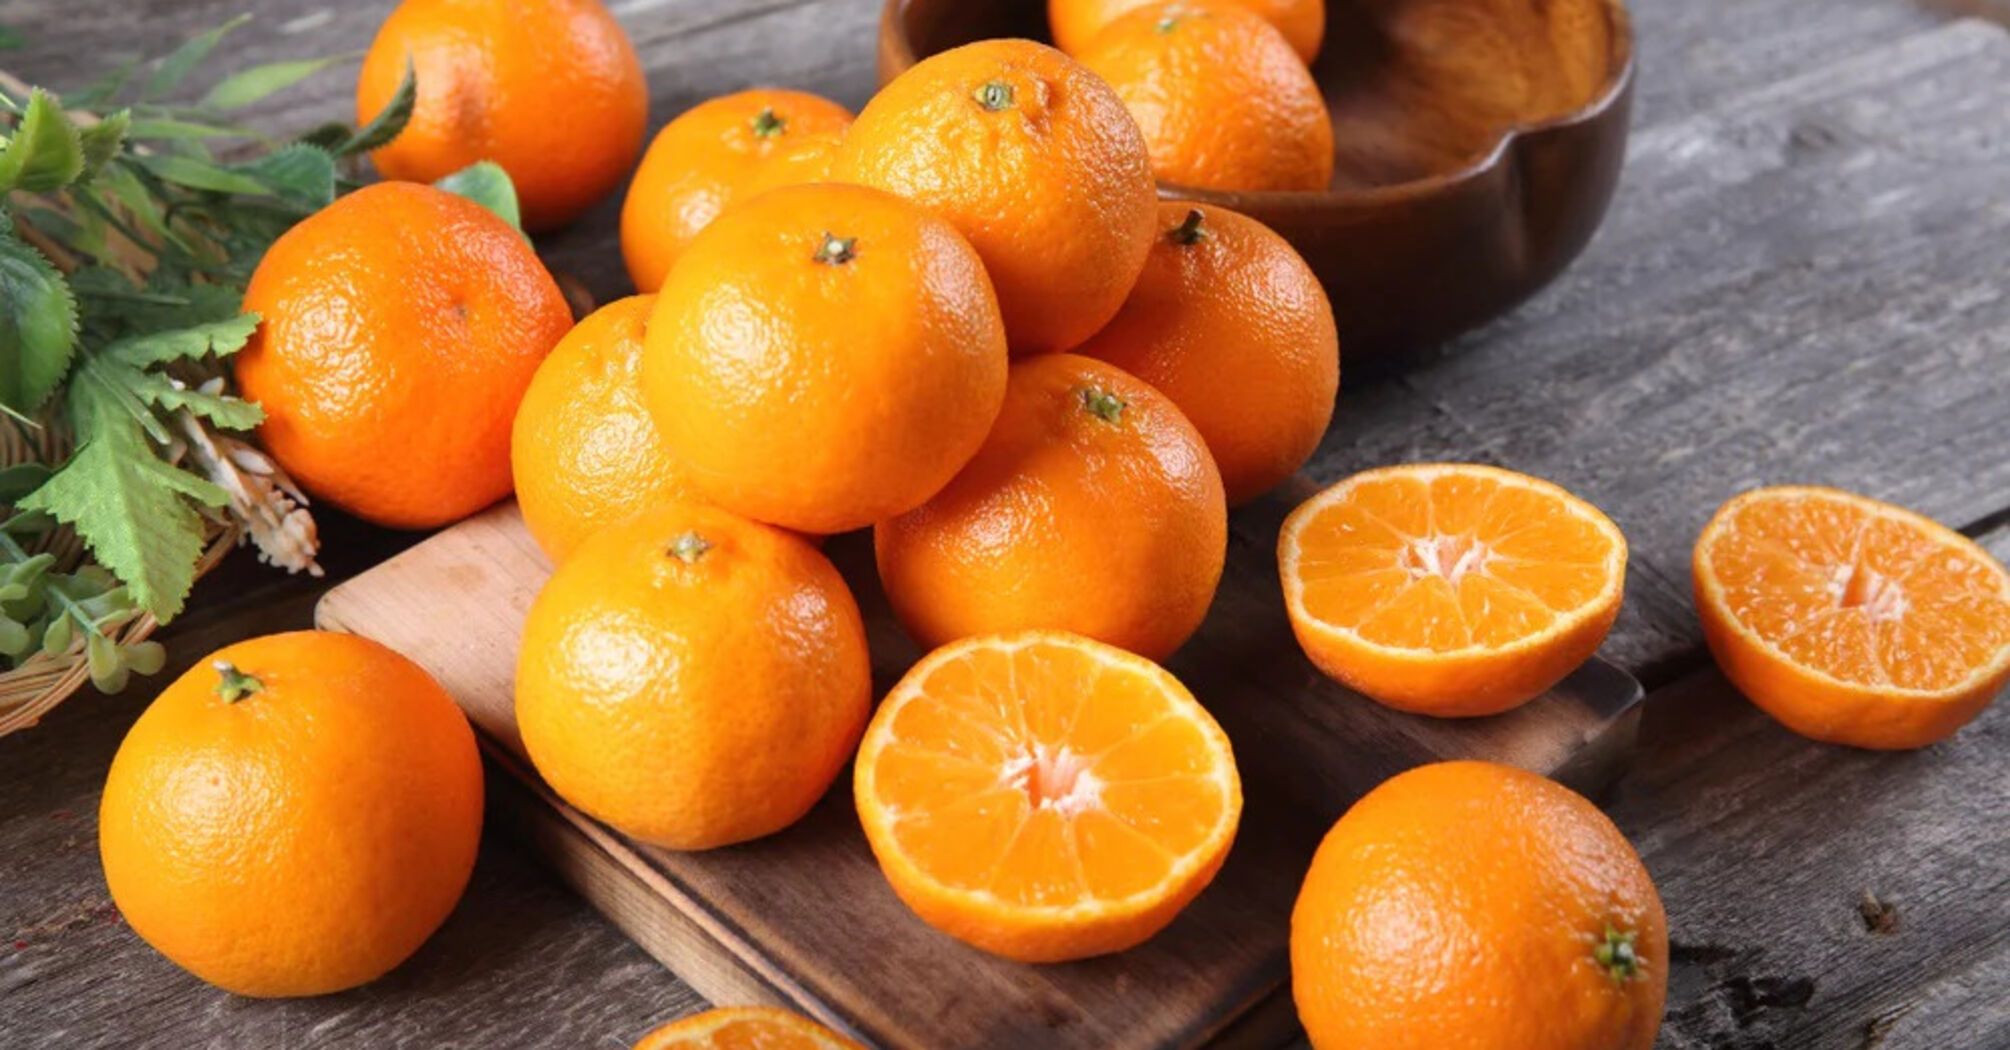 How to choose the sweetest tangerines